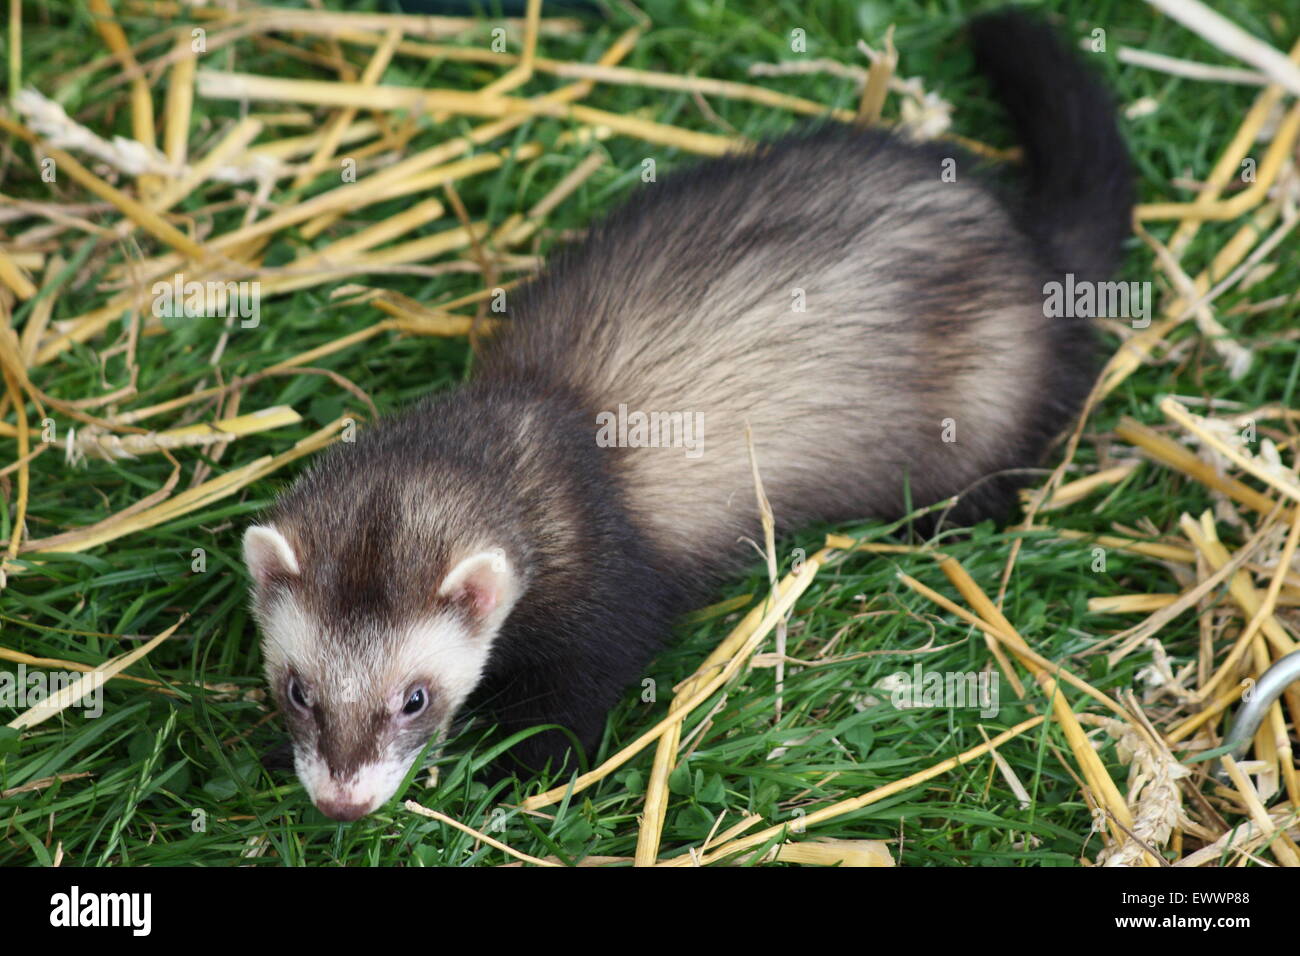 A ferret at a traditional British summer country fair, England UK Stock Photo